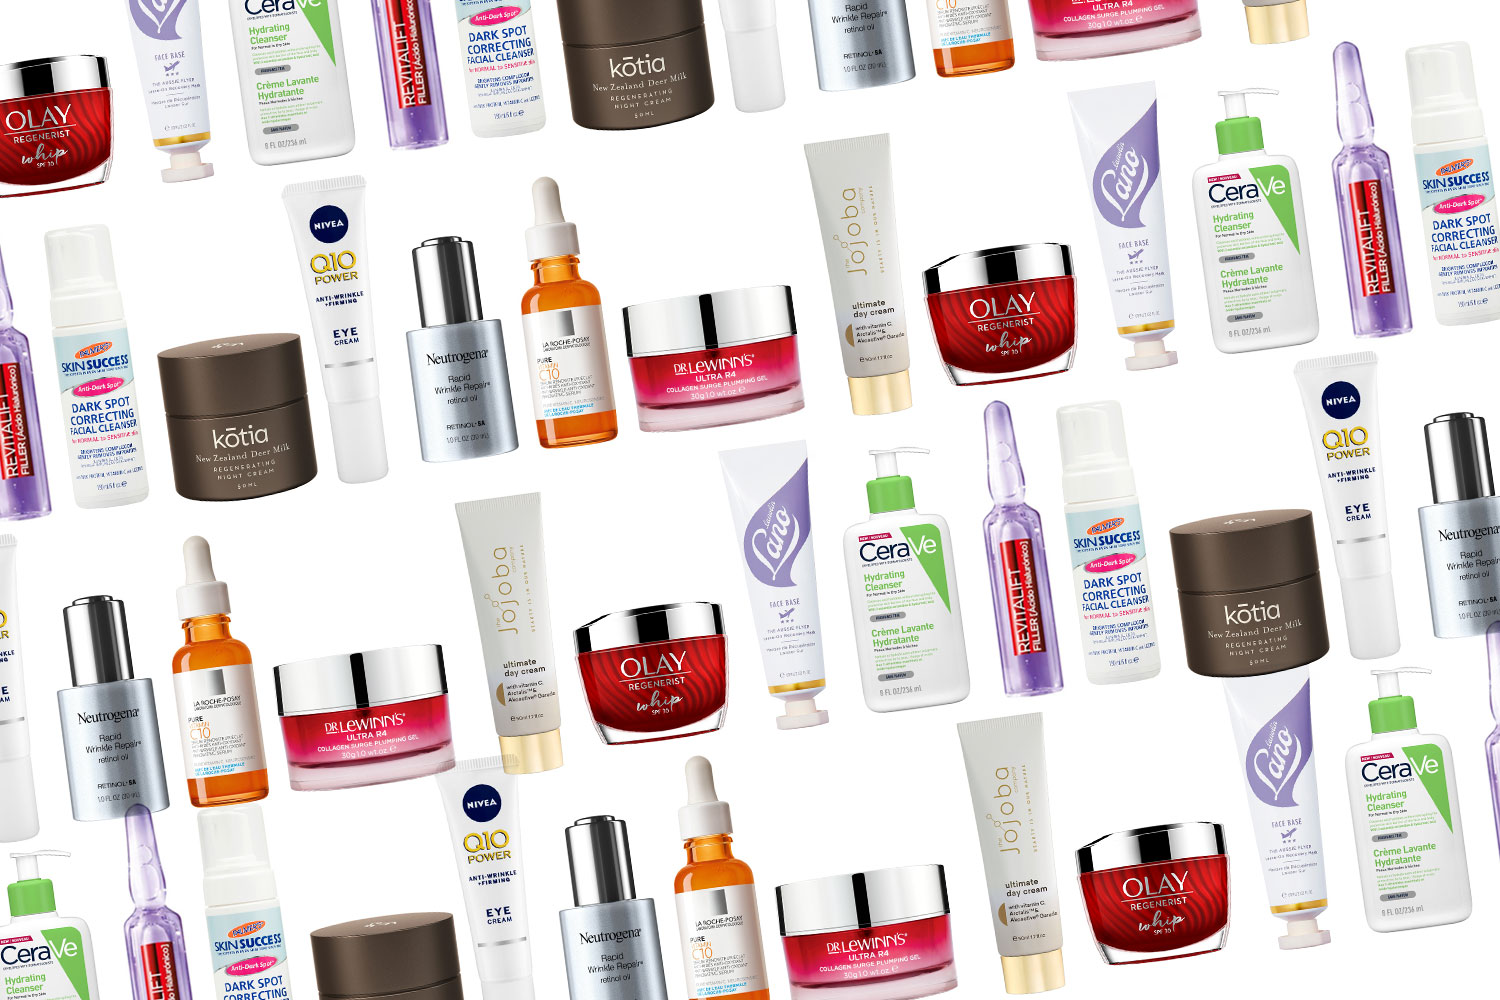 Our Beauty Editors Have Picked The Best Masstige Skincare Products From 2019